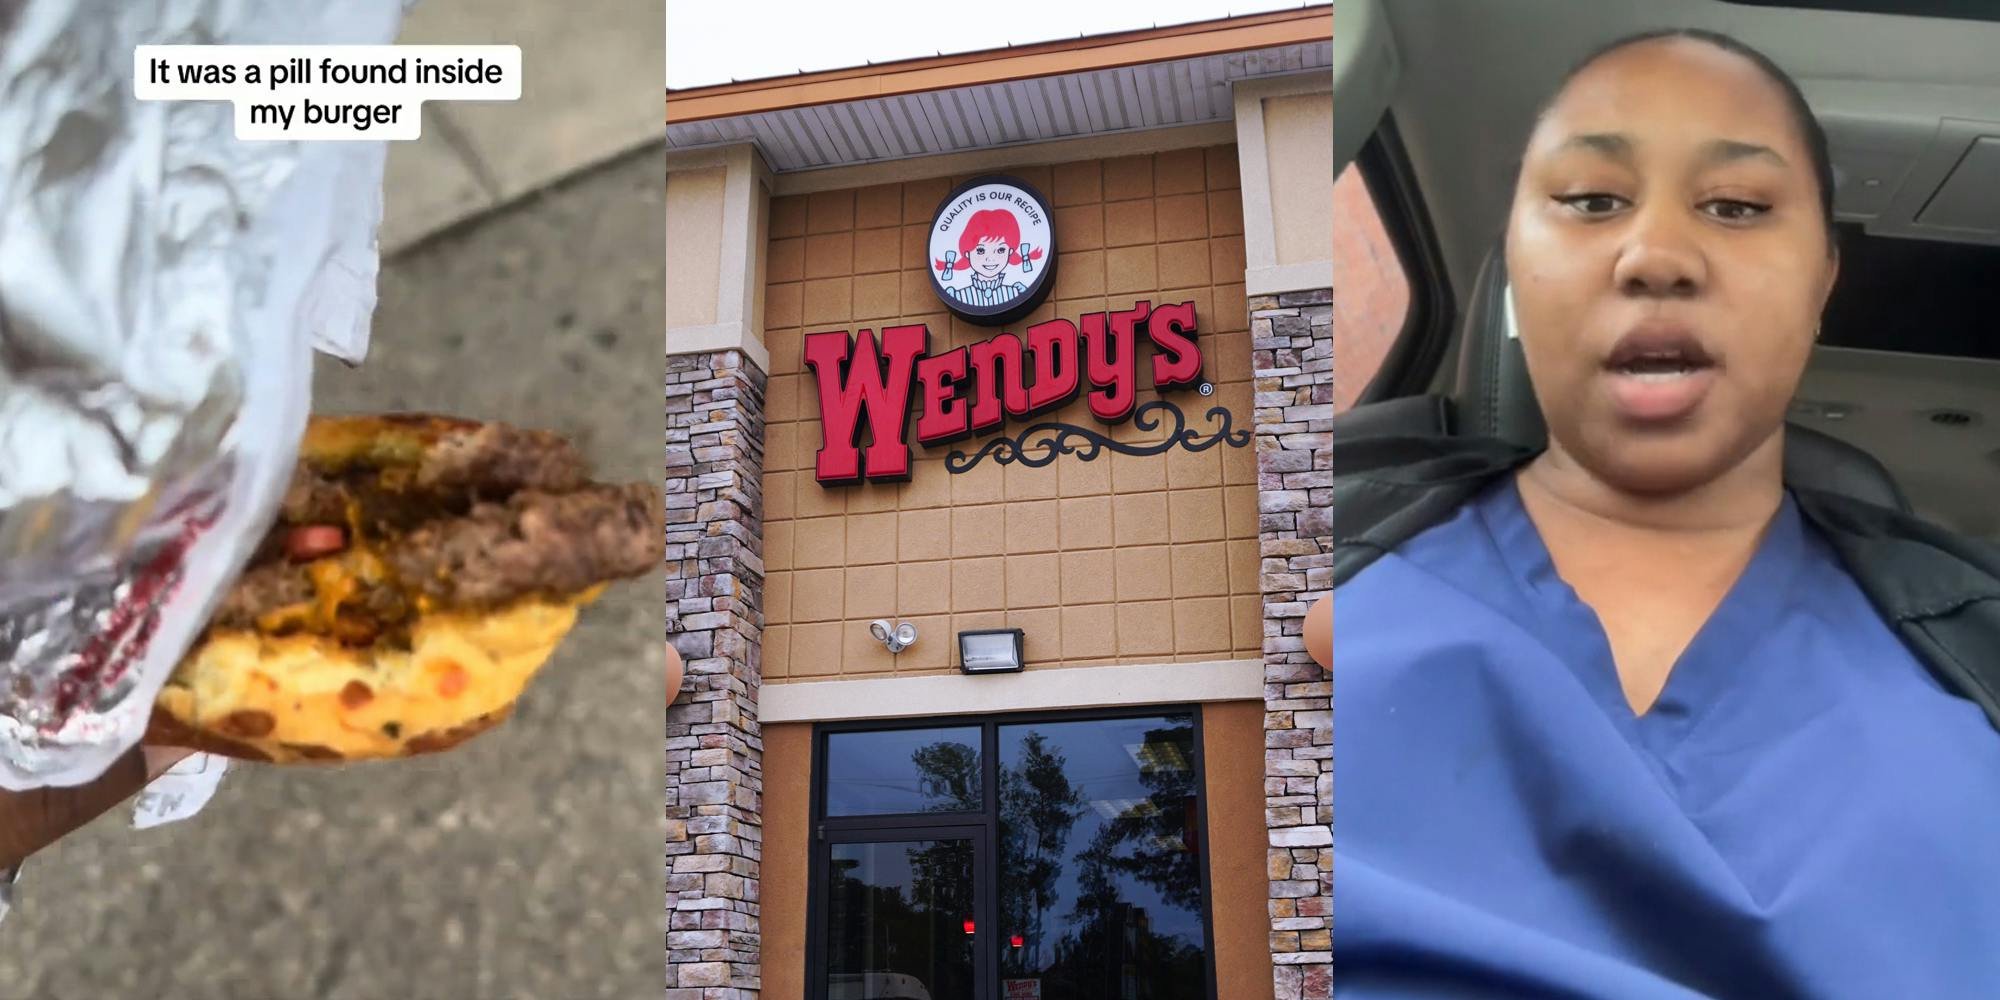 ‘I would have called the police’: Wendy’s customer says she found pill inside of her burger